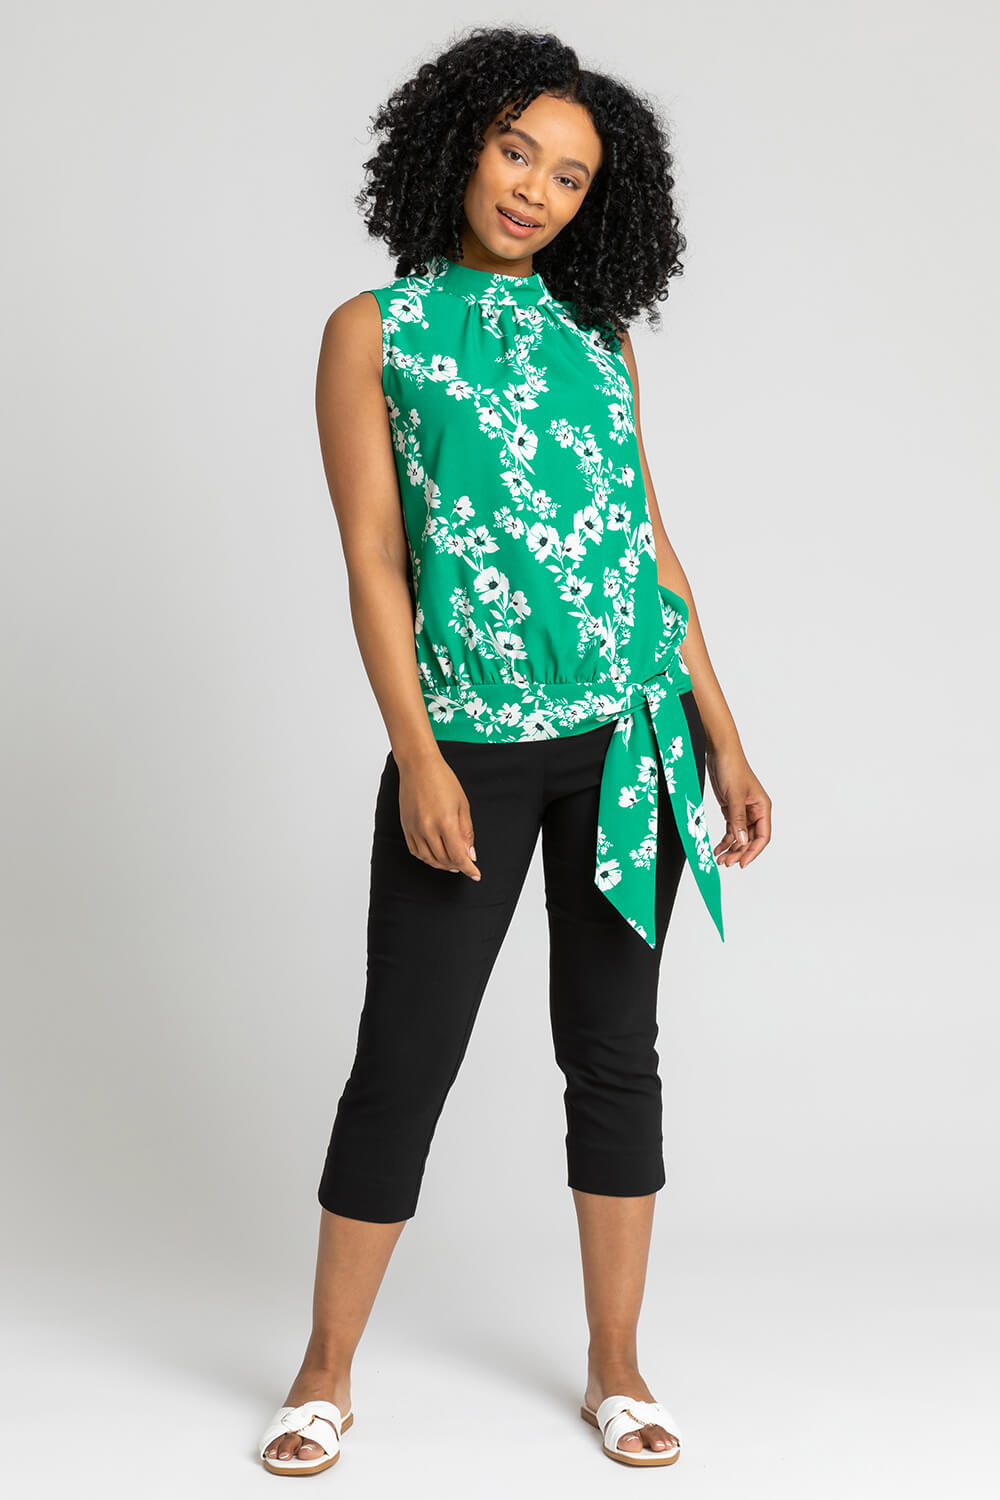 Green Petite Floral Print High Neck Tie Top, Image 3 of 5